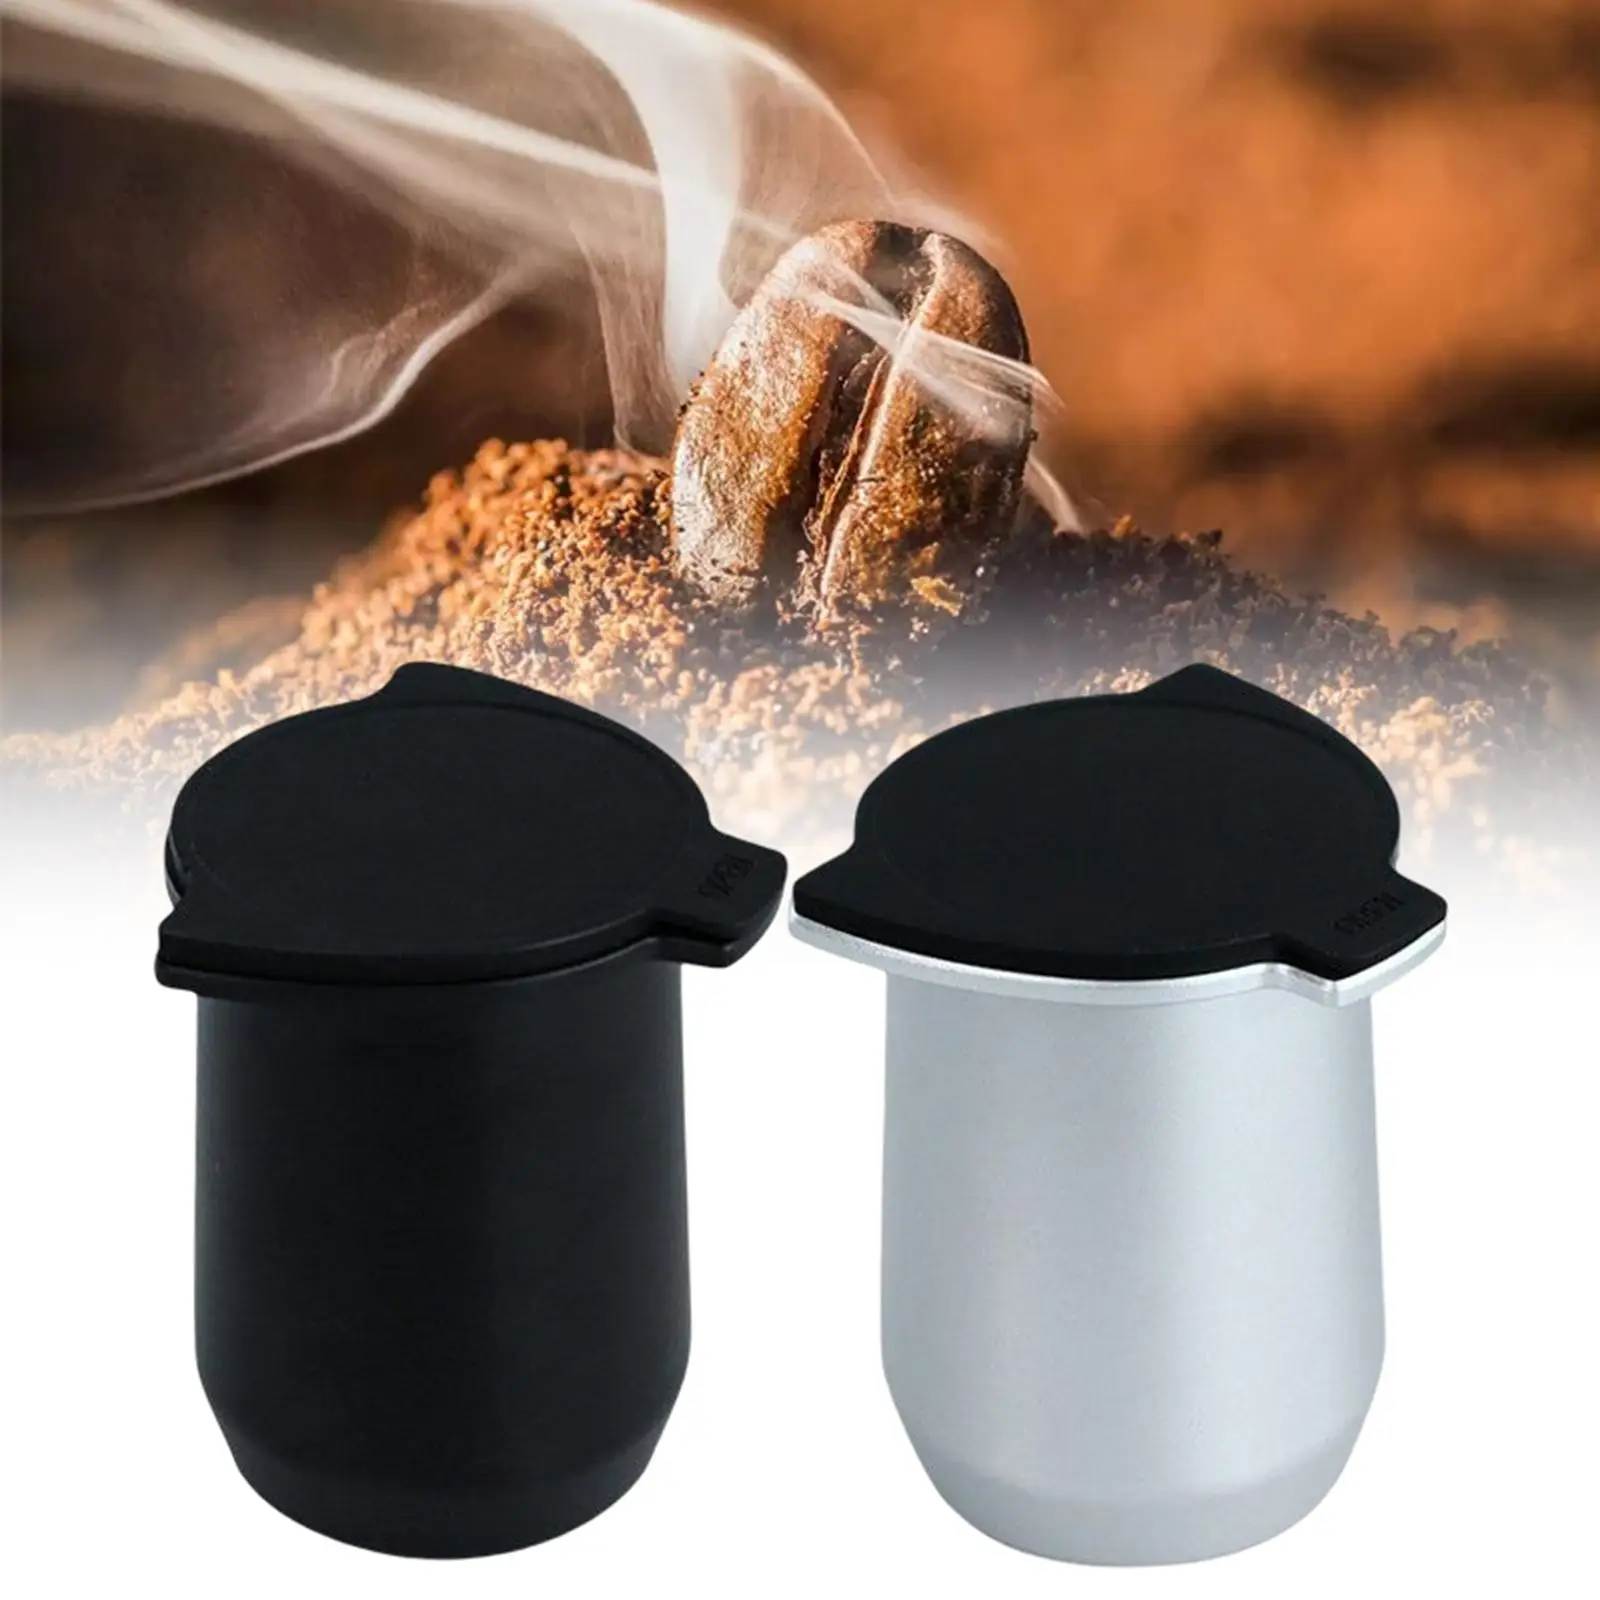 Aluminum Alloy Dosing Cup Portable Small with Seal Cover Parts Durable Small Espresso Cup for 8 espresso Machine